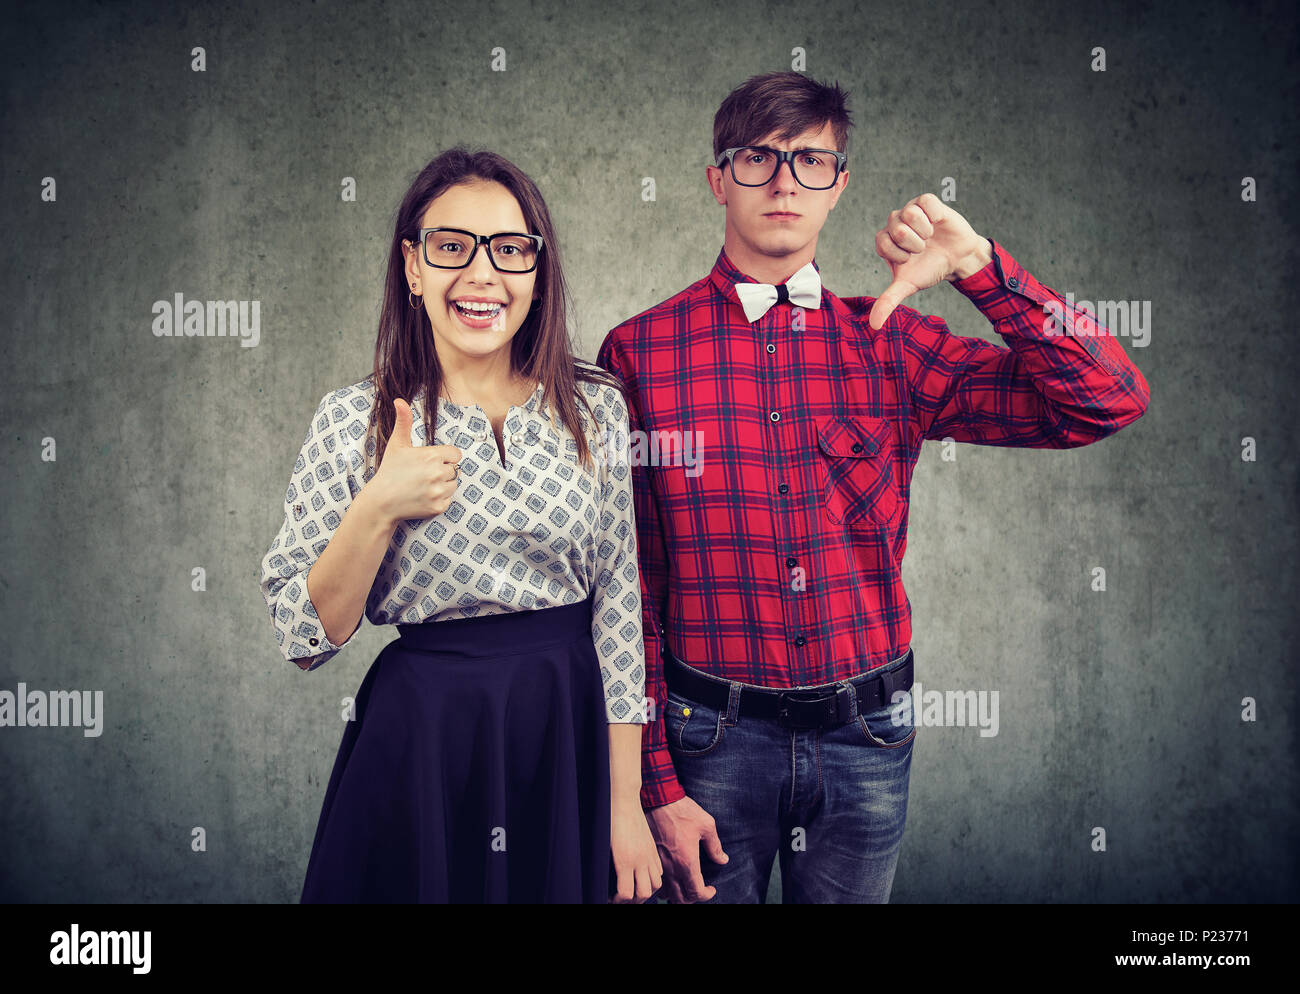 Young stylish man with thumb down standing with optimistic girl showing thumb up looking at camera. Stock Photo